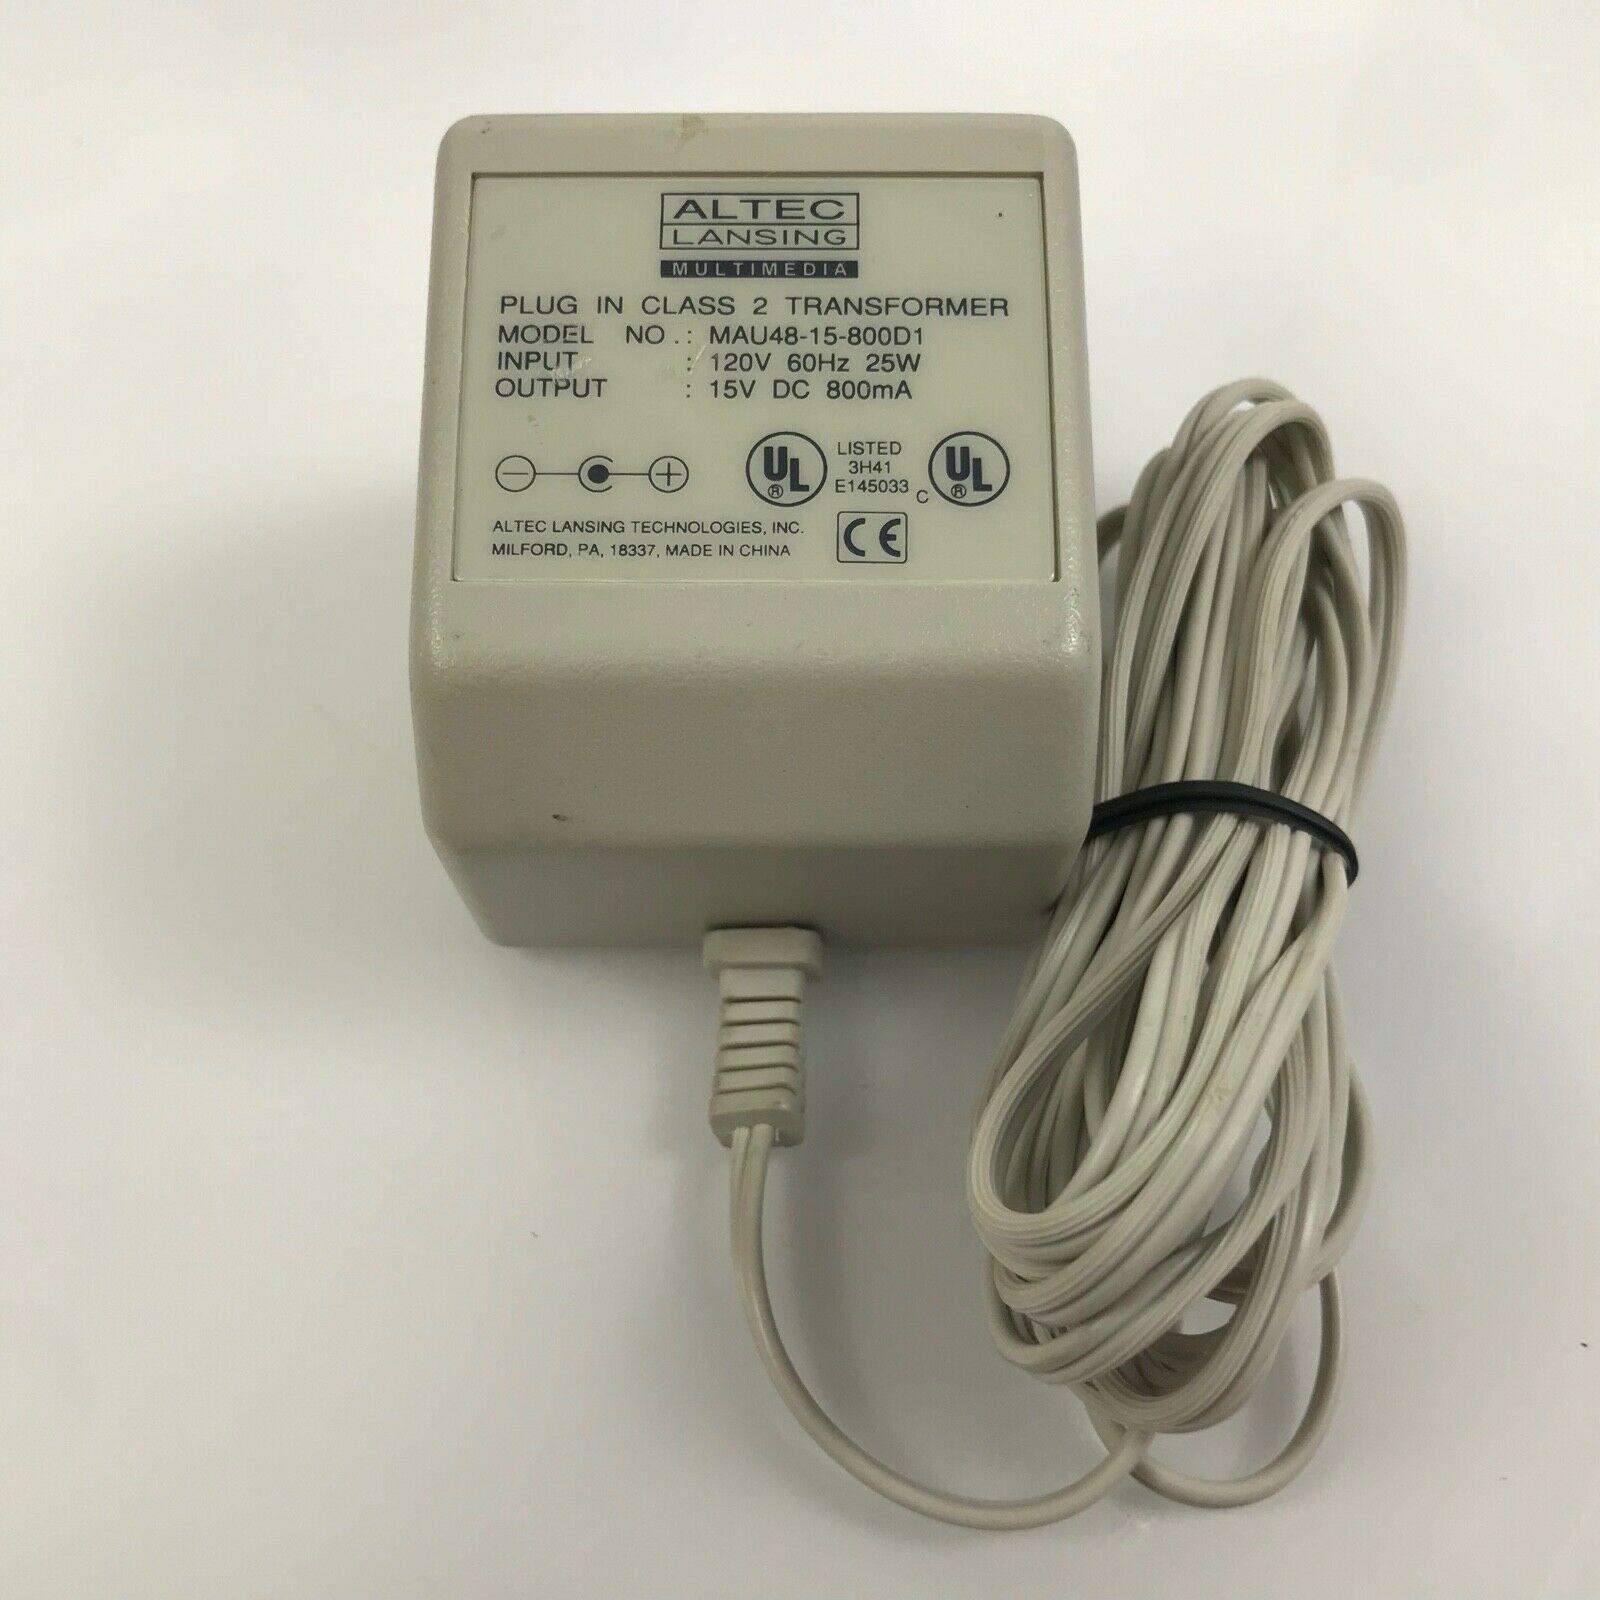 New 15V 800mA Altec Lansing MAU48-15-800D1 Plug-In Class 2 Transformer AC Adapter - Click Image to Close